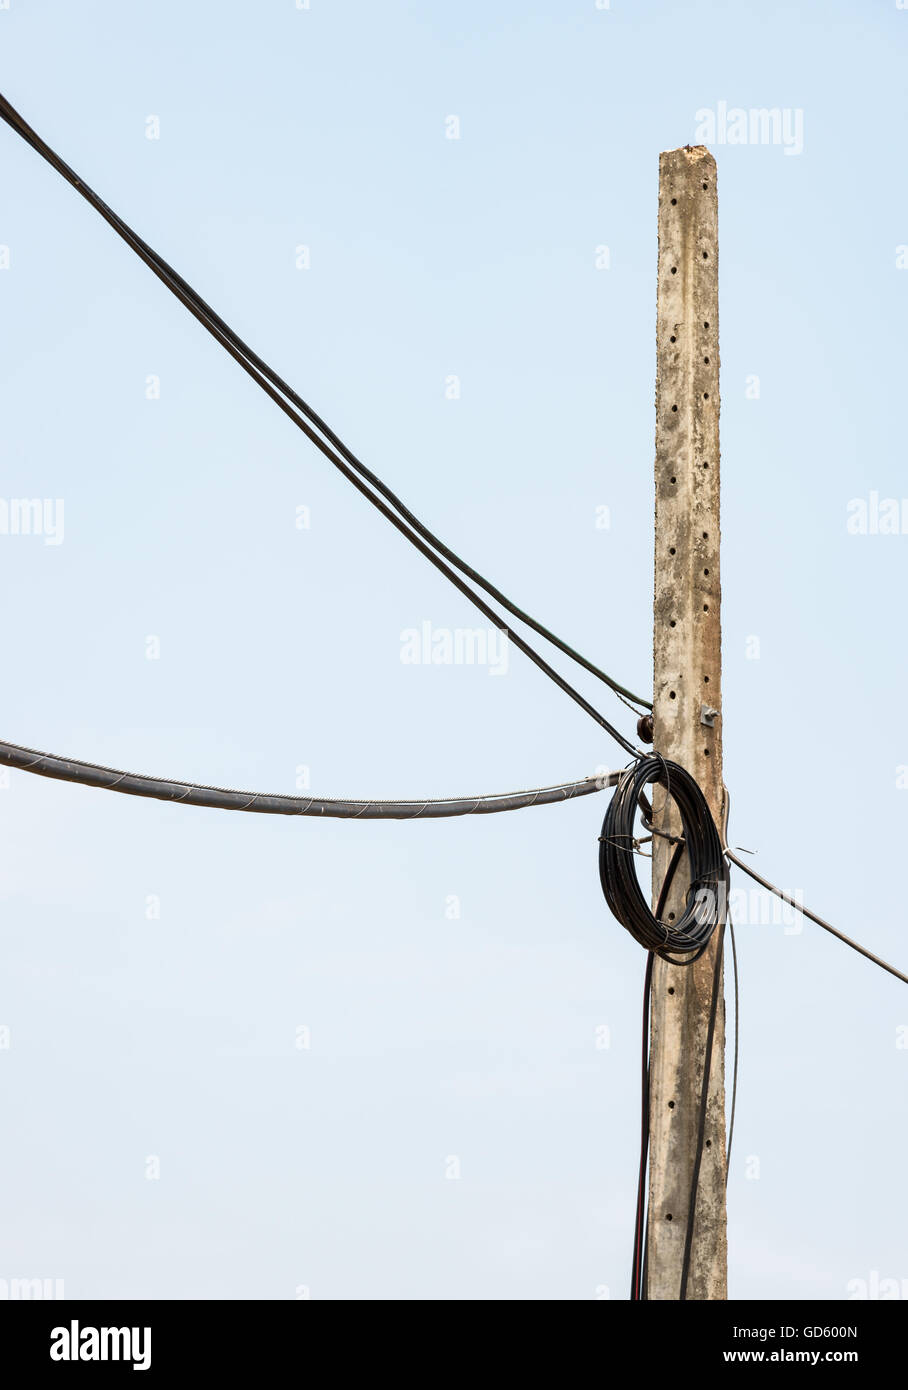 Roll up of the telephone cable on the electric pole in the rural area. Stock Photo